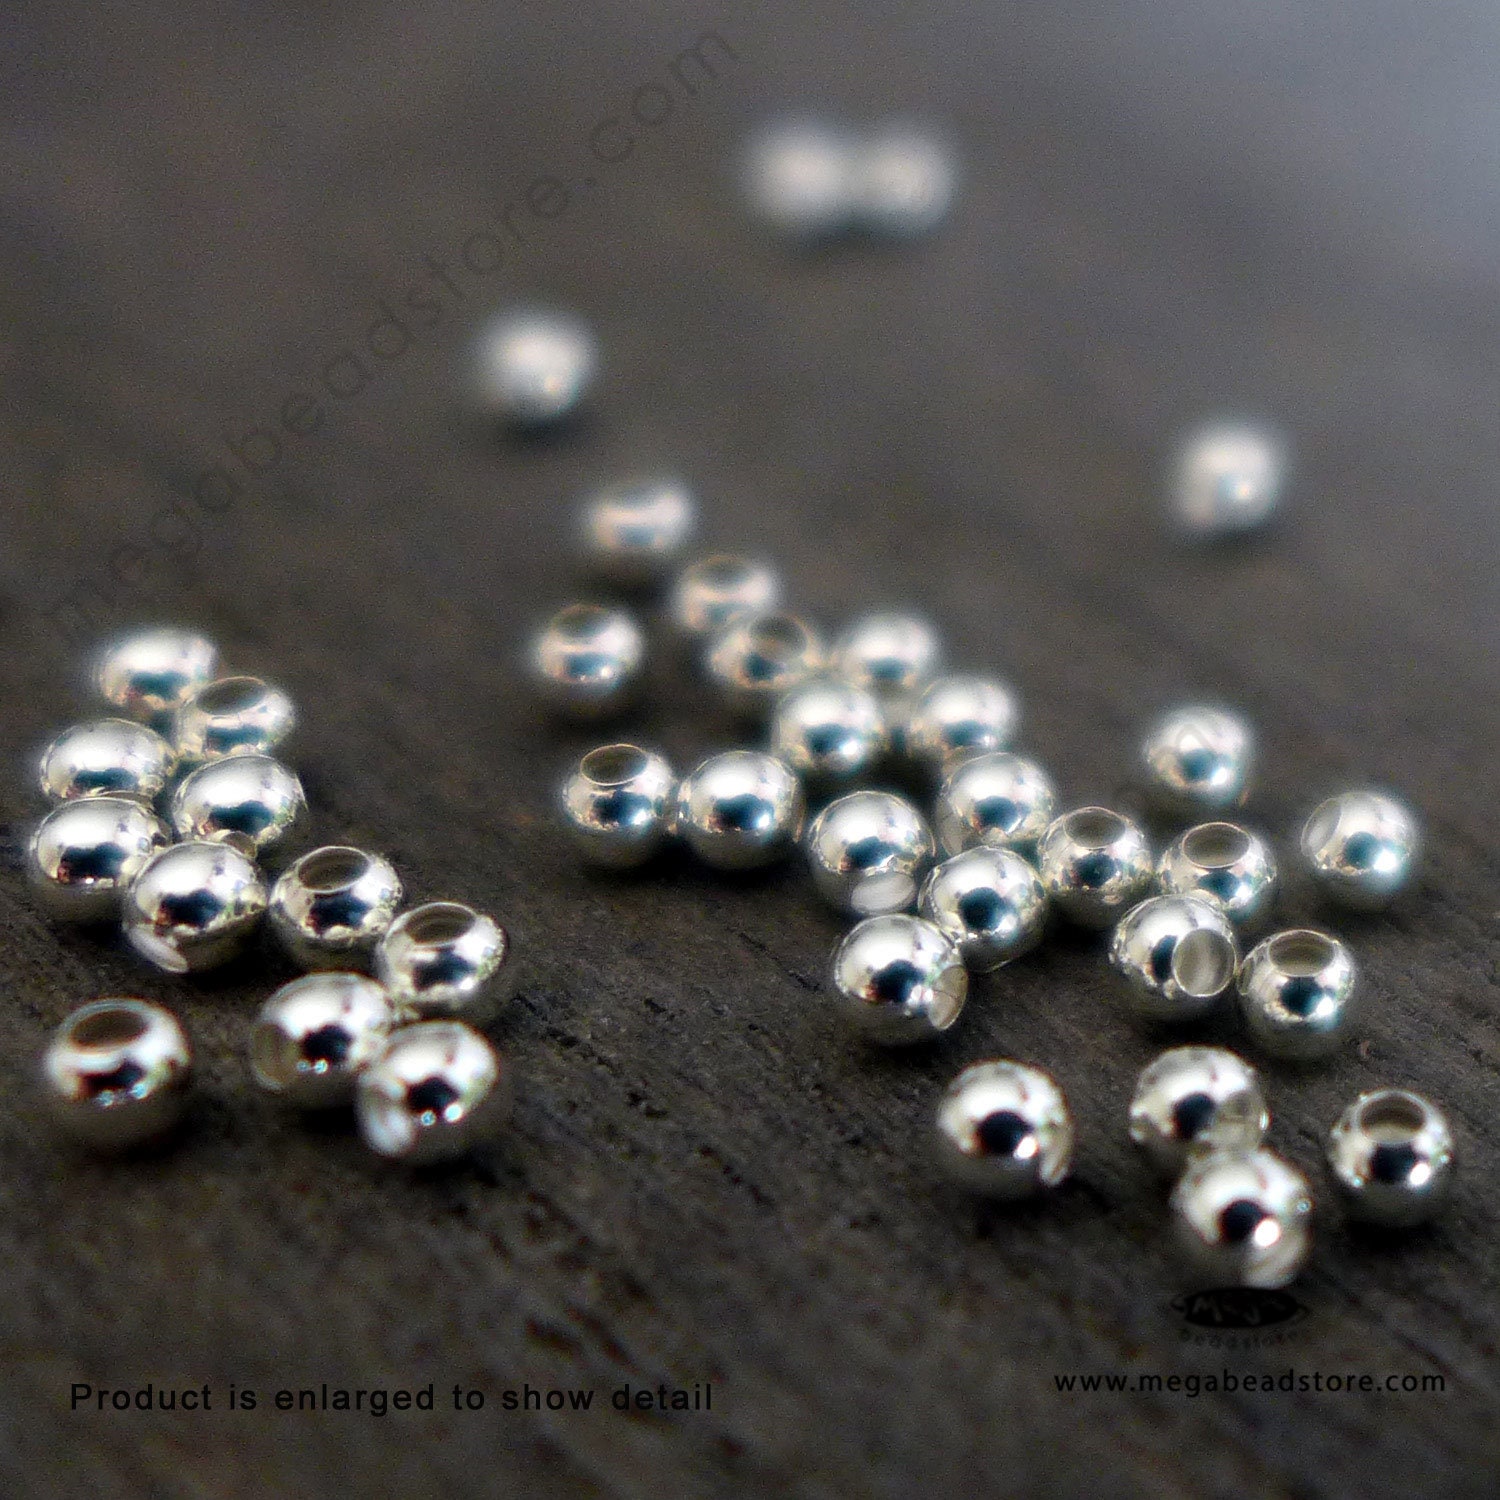 12mm (2.5mm hole) Sterling Silver Beads- 1 pc-B39-12